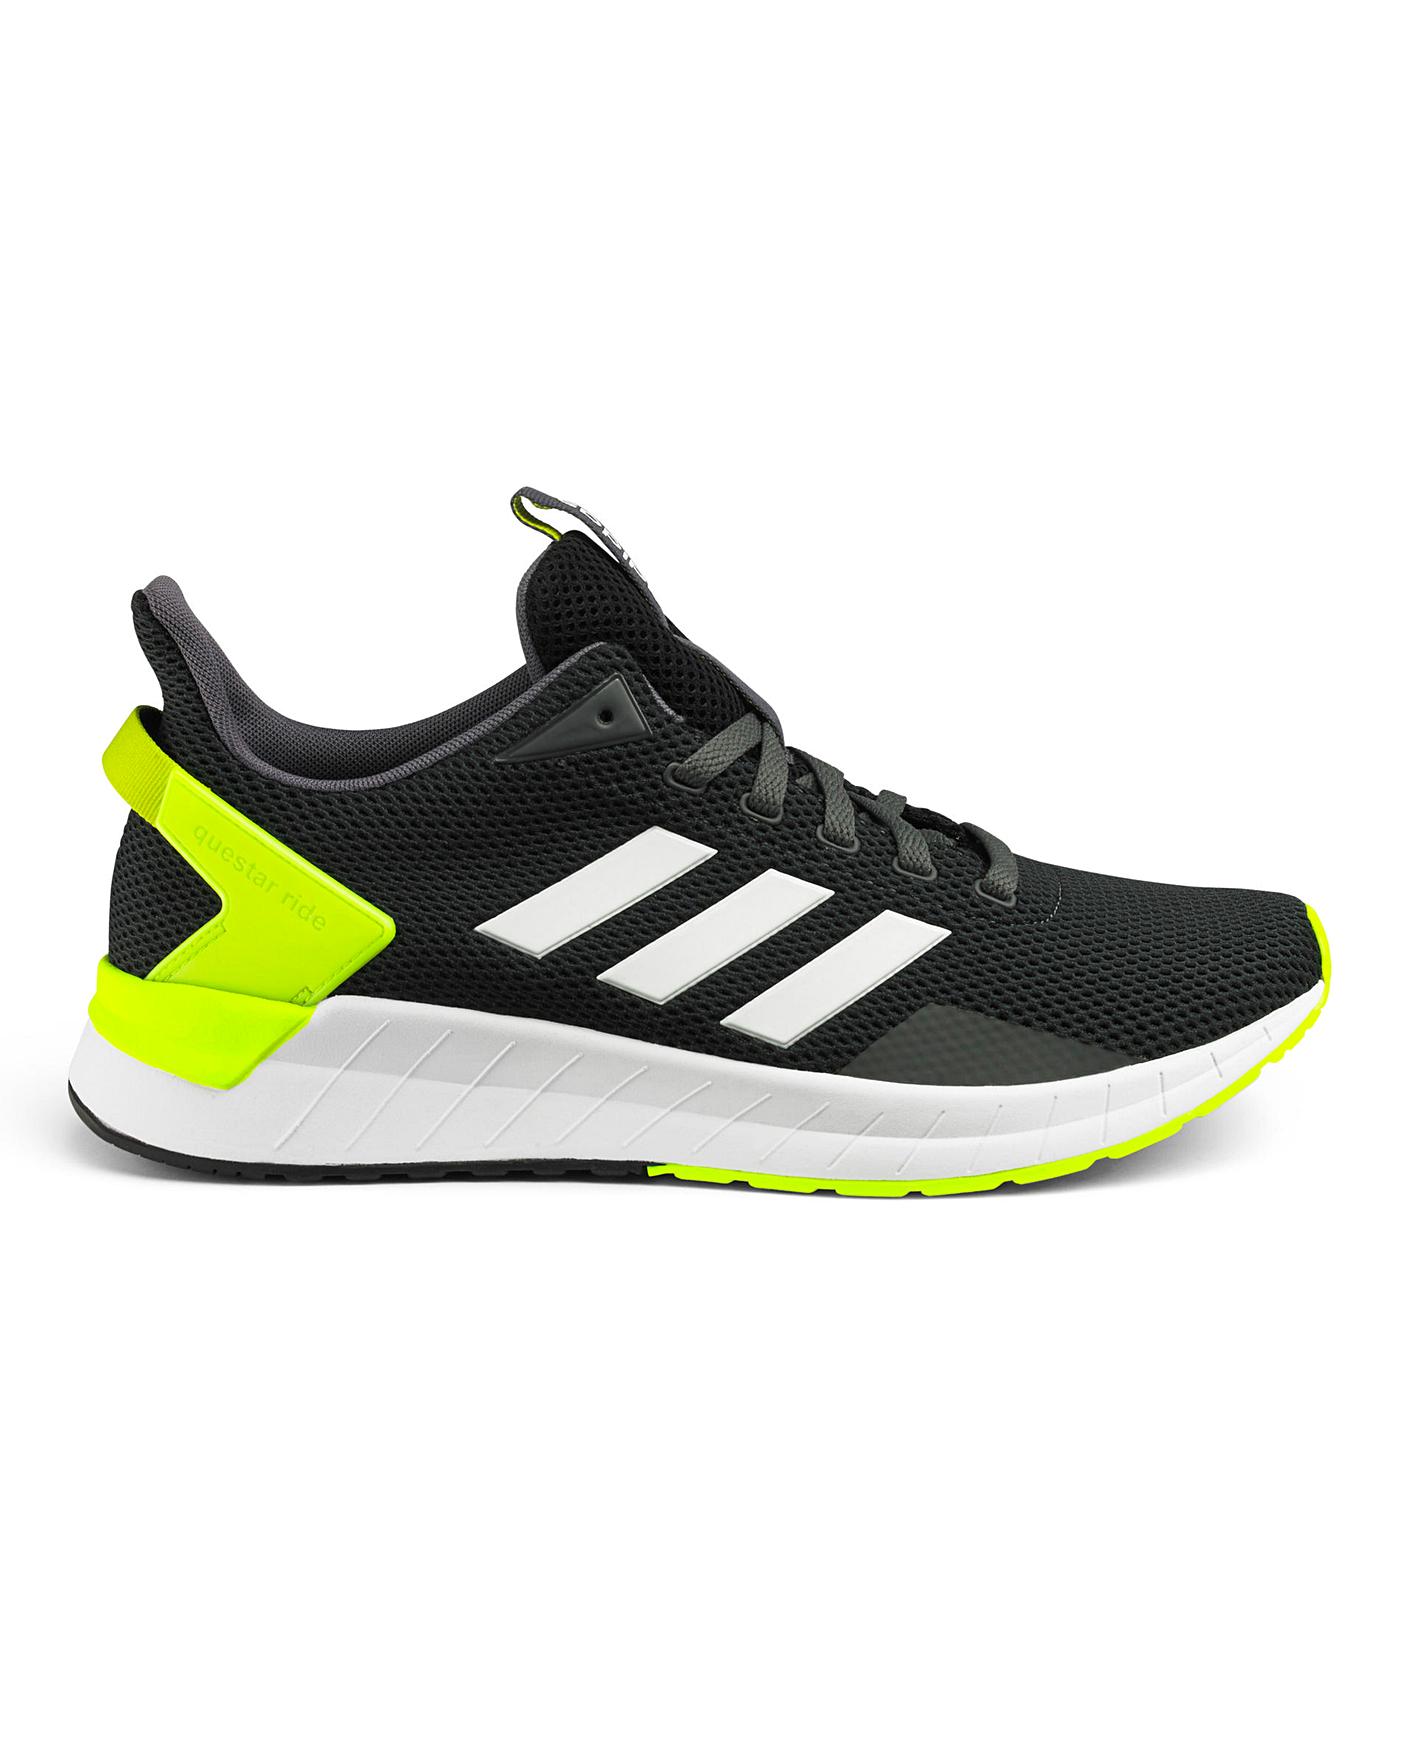 adidas Questar Ride Trainers | Oxendales